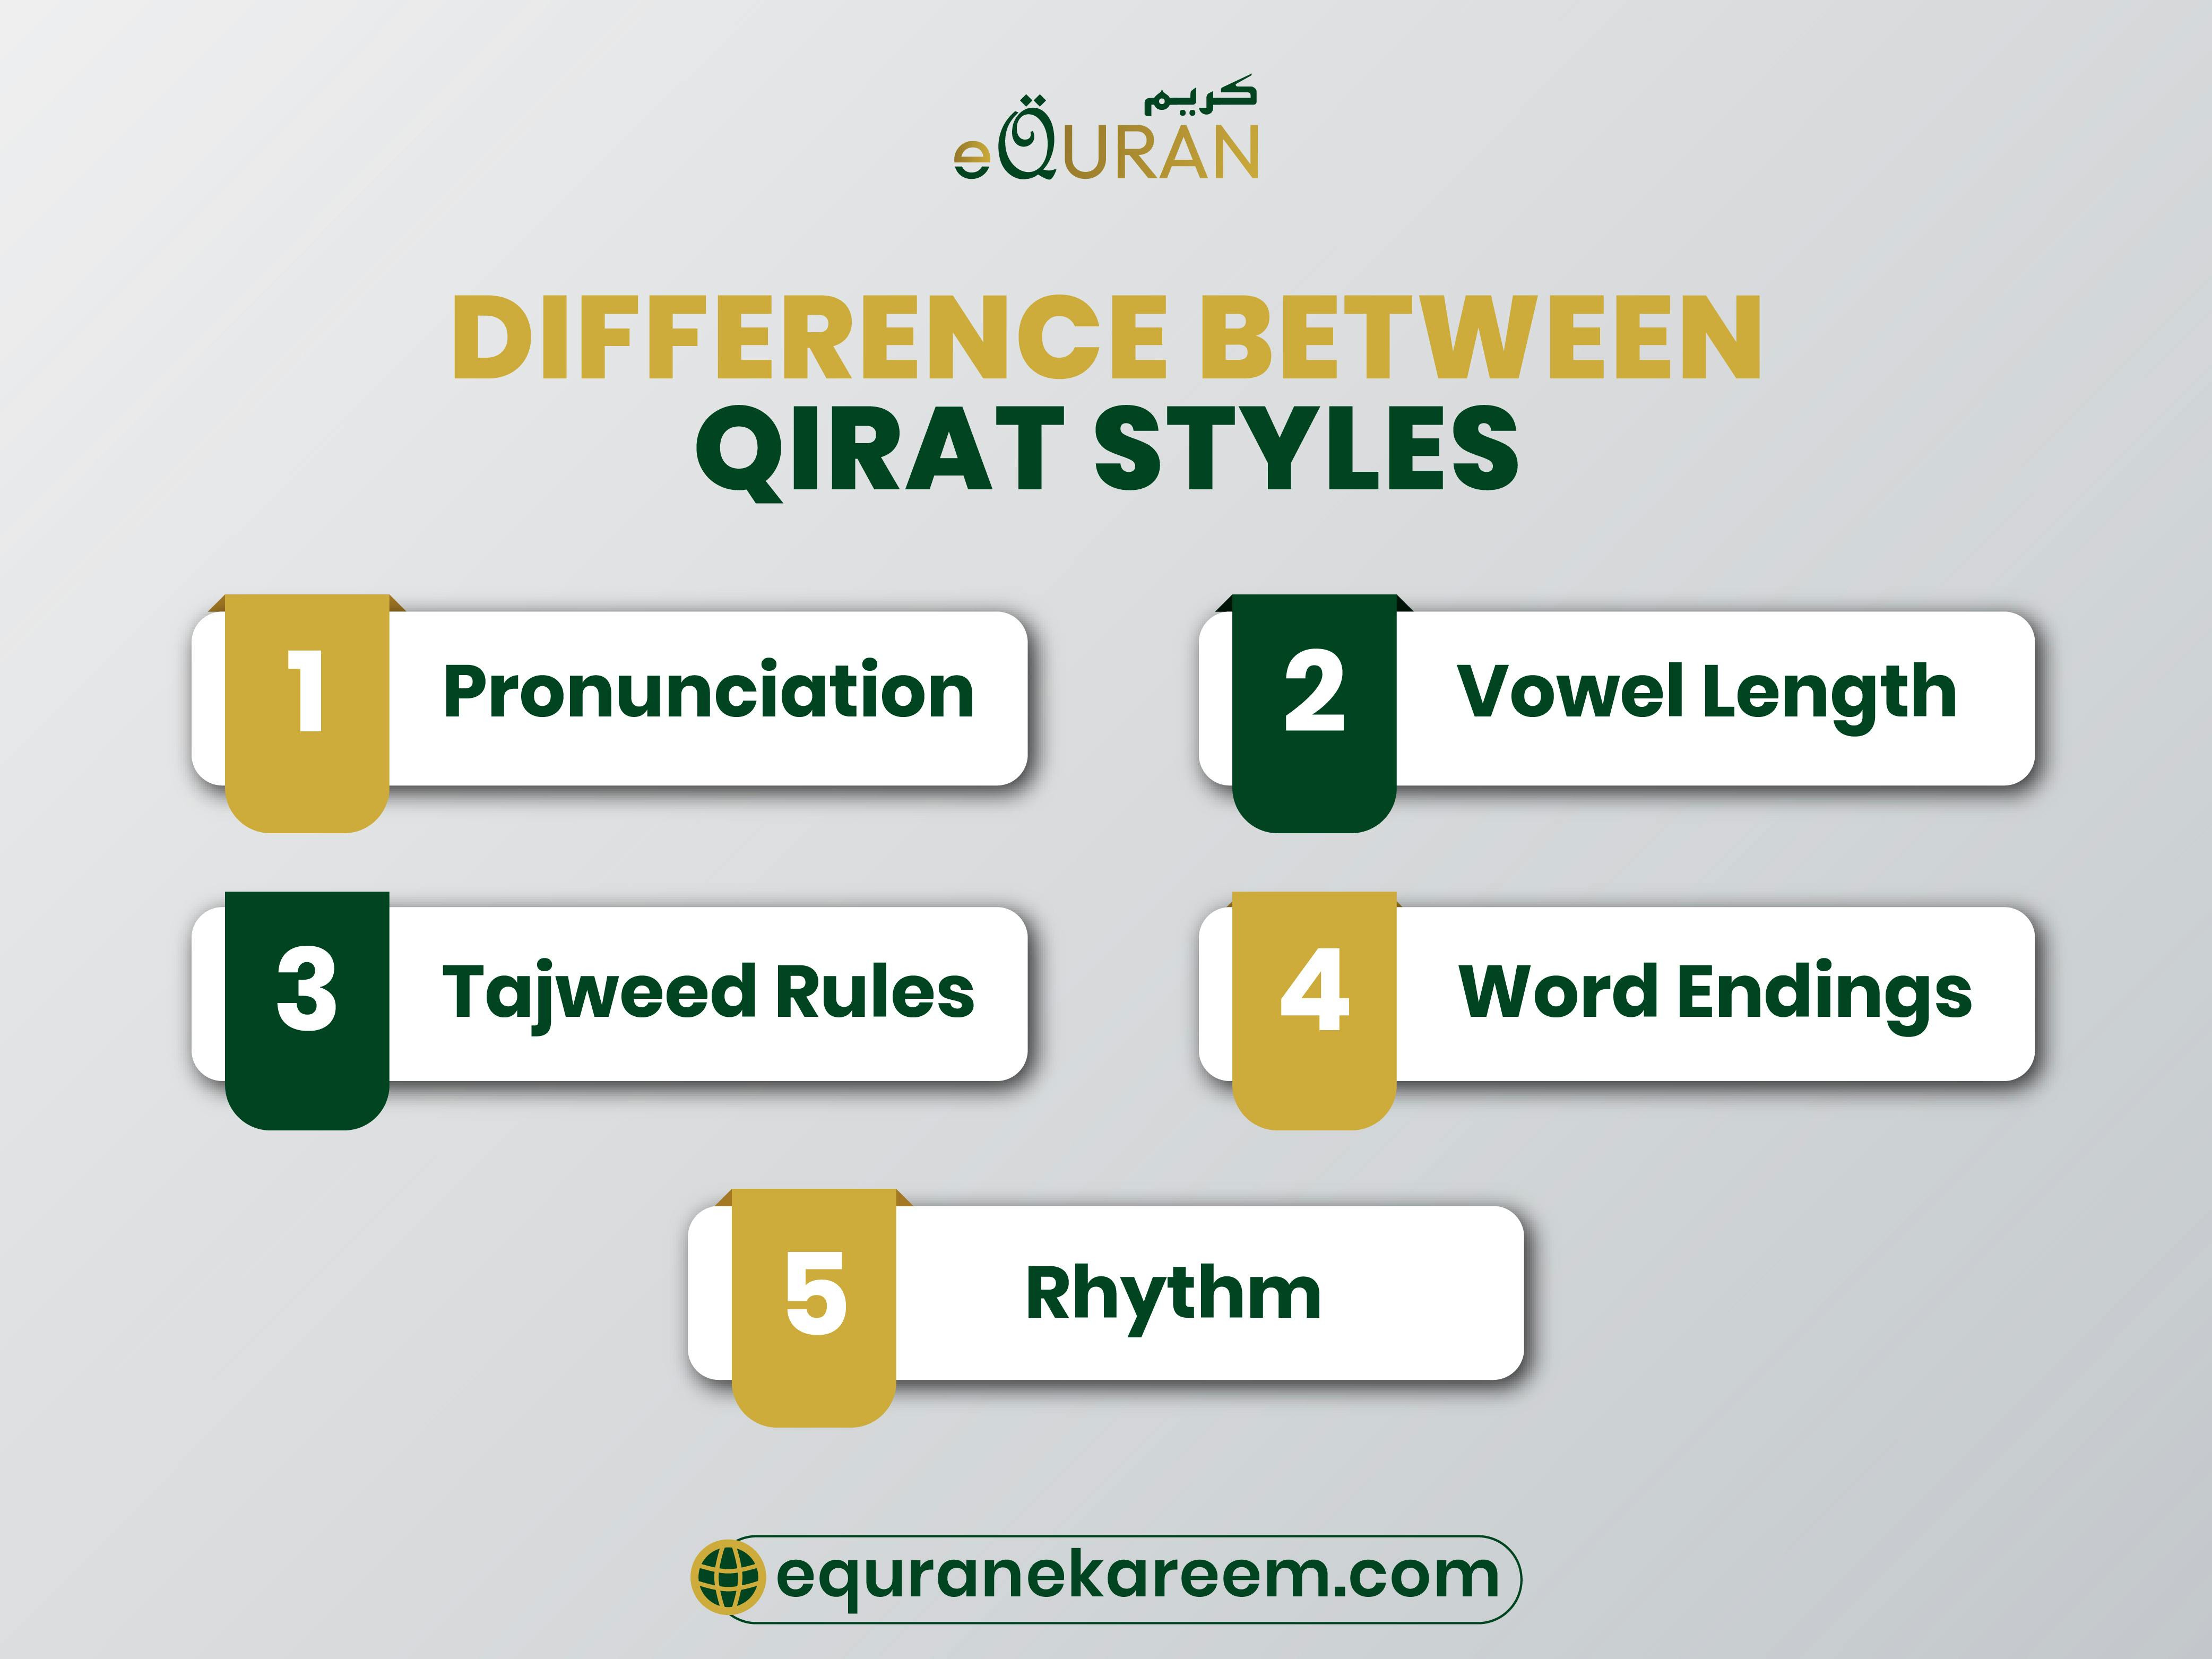 if you're a Quran reader or want  Quran recitation with Tajweed read different Qirat Styles and understand to learn quran.